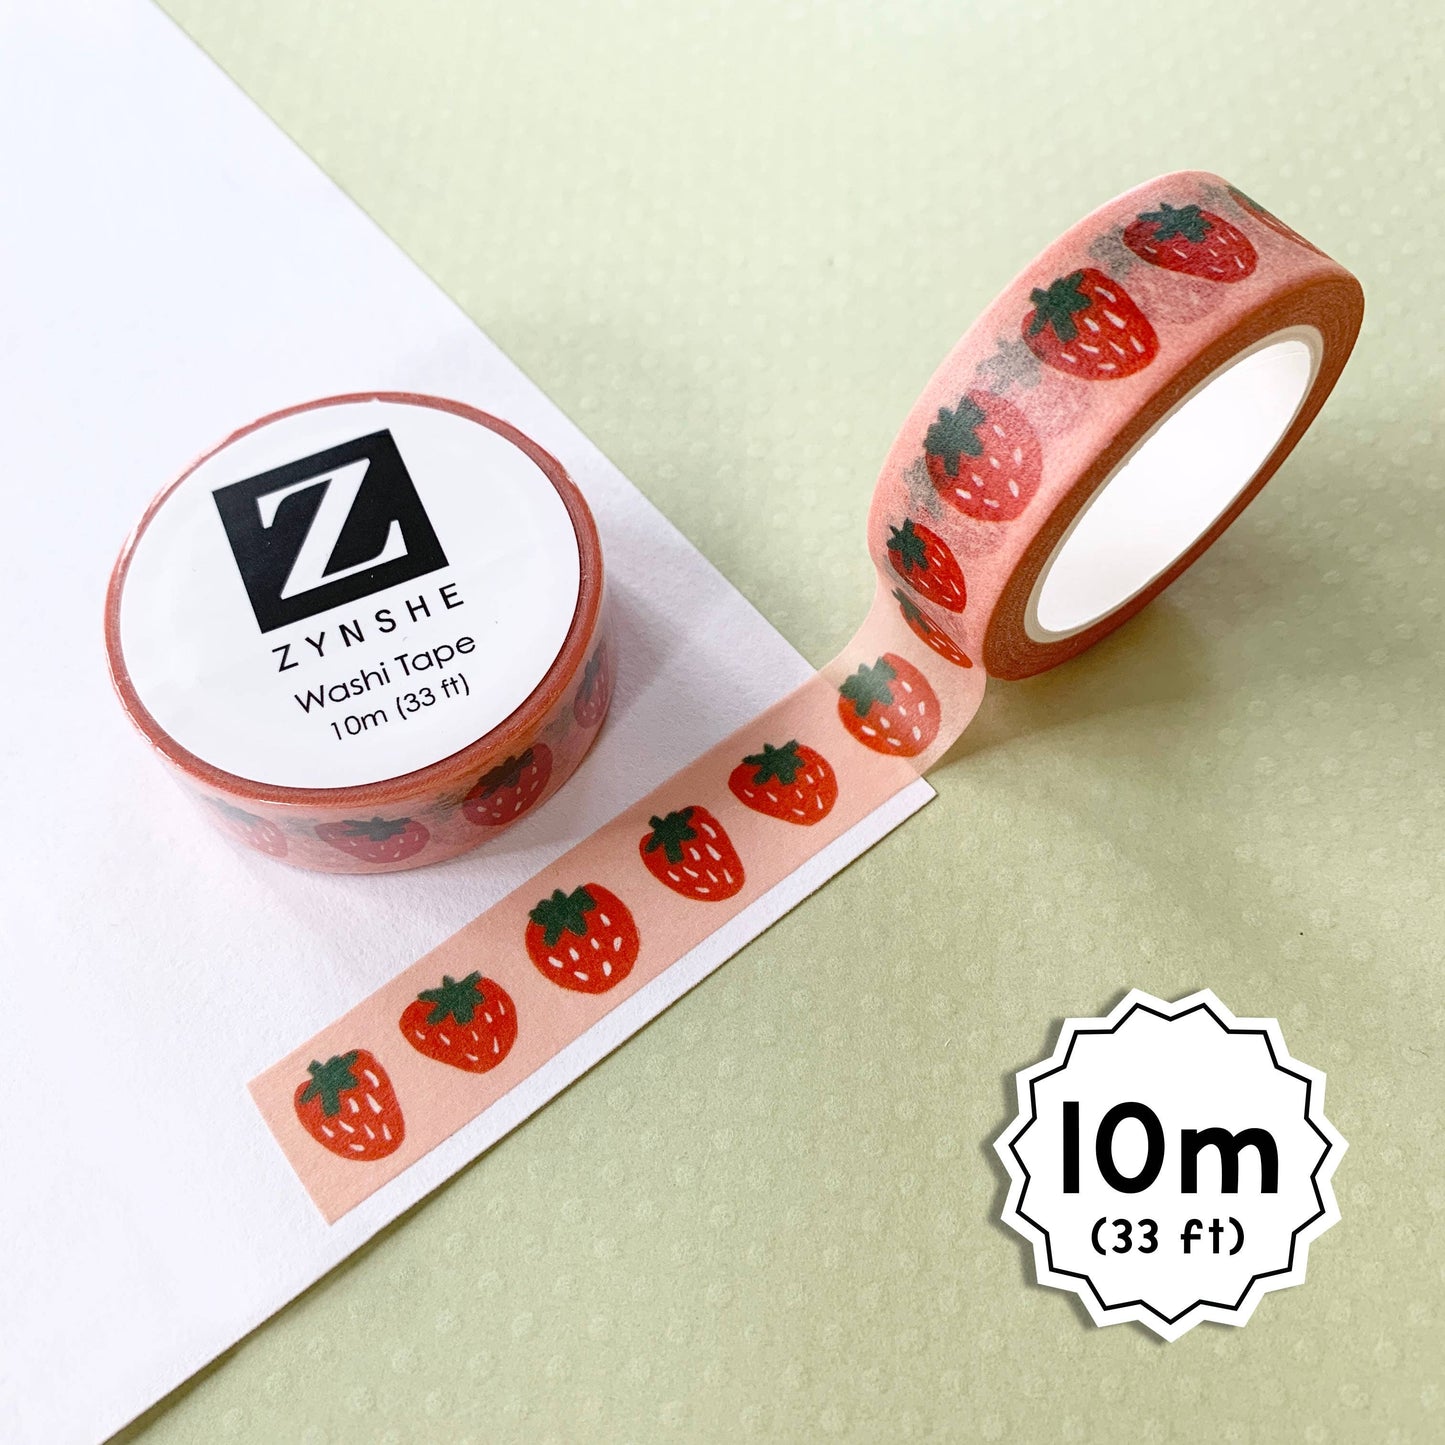 Photo of washi tape with strawberries print. Image on tape is of red strawberries with white seeds and green leaves on simple pink background.